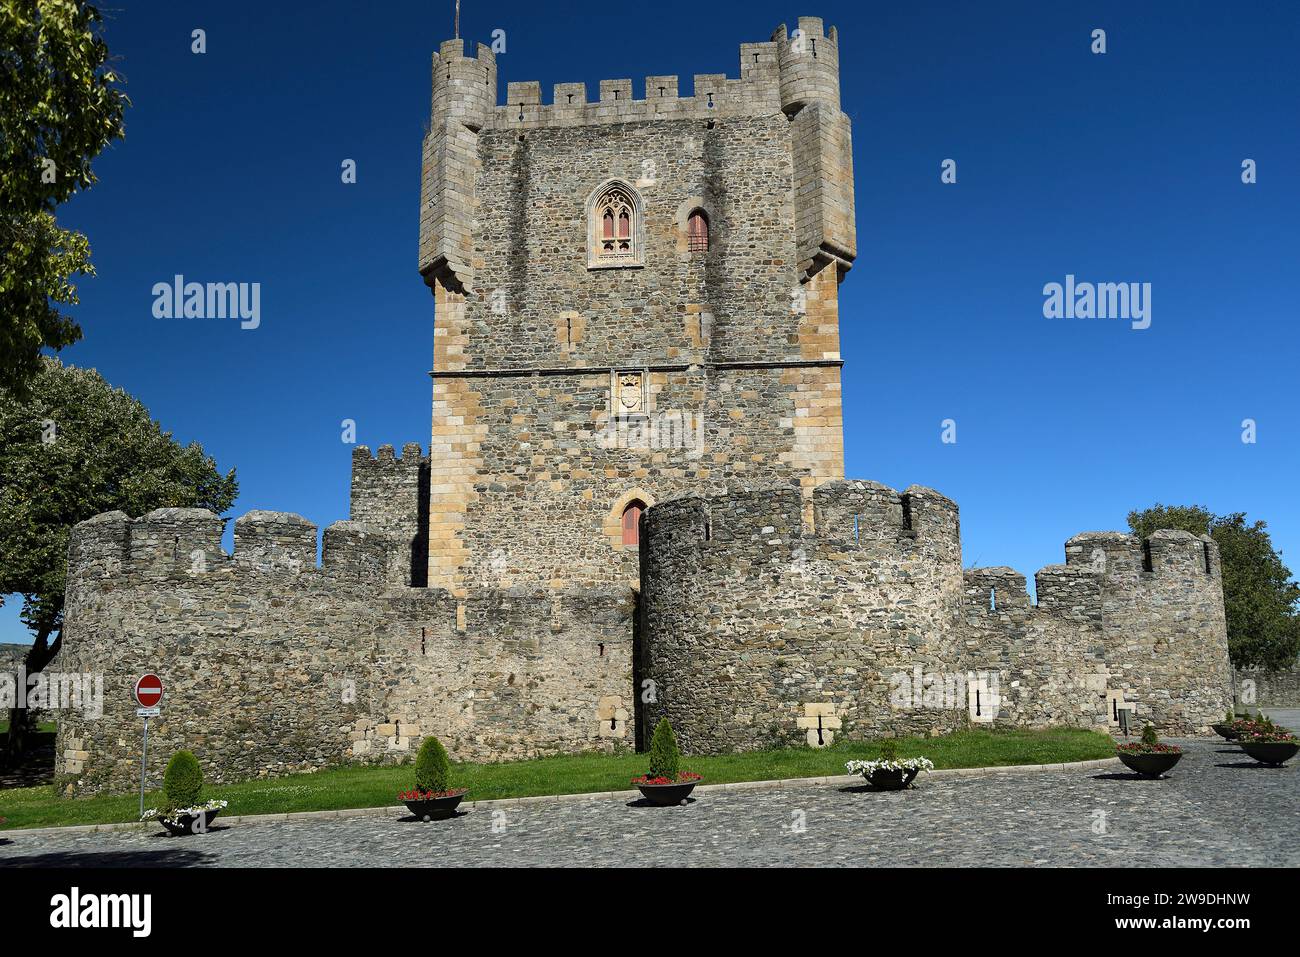 The tower of the castle of Bragança, Portugal. Stock Photo